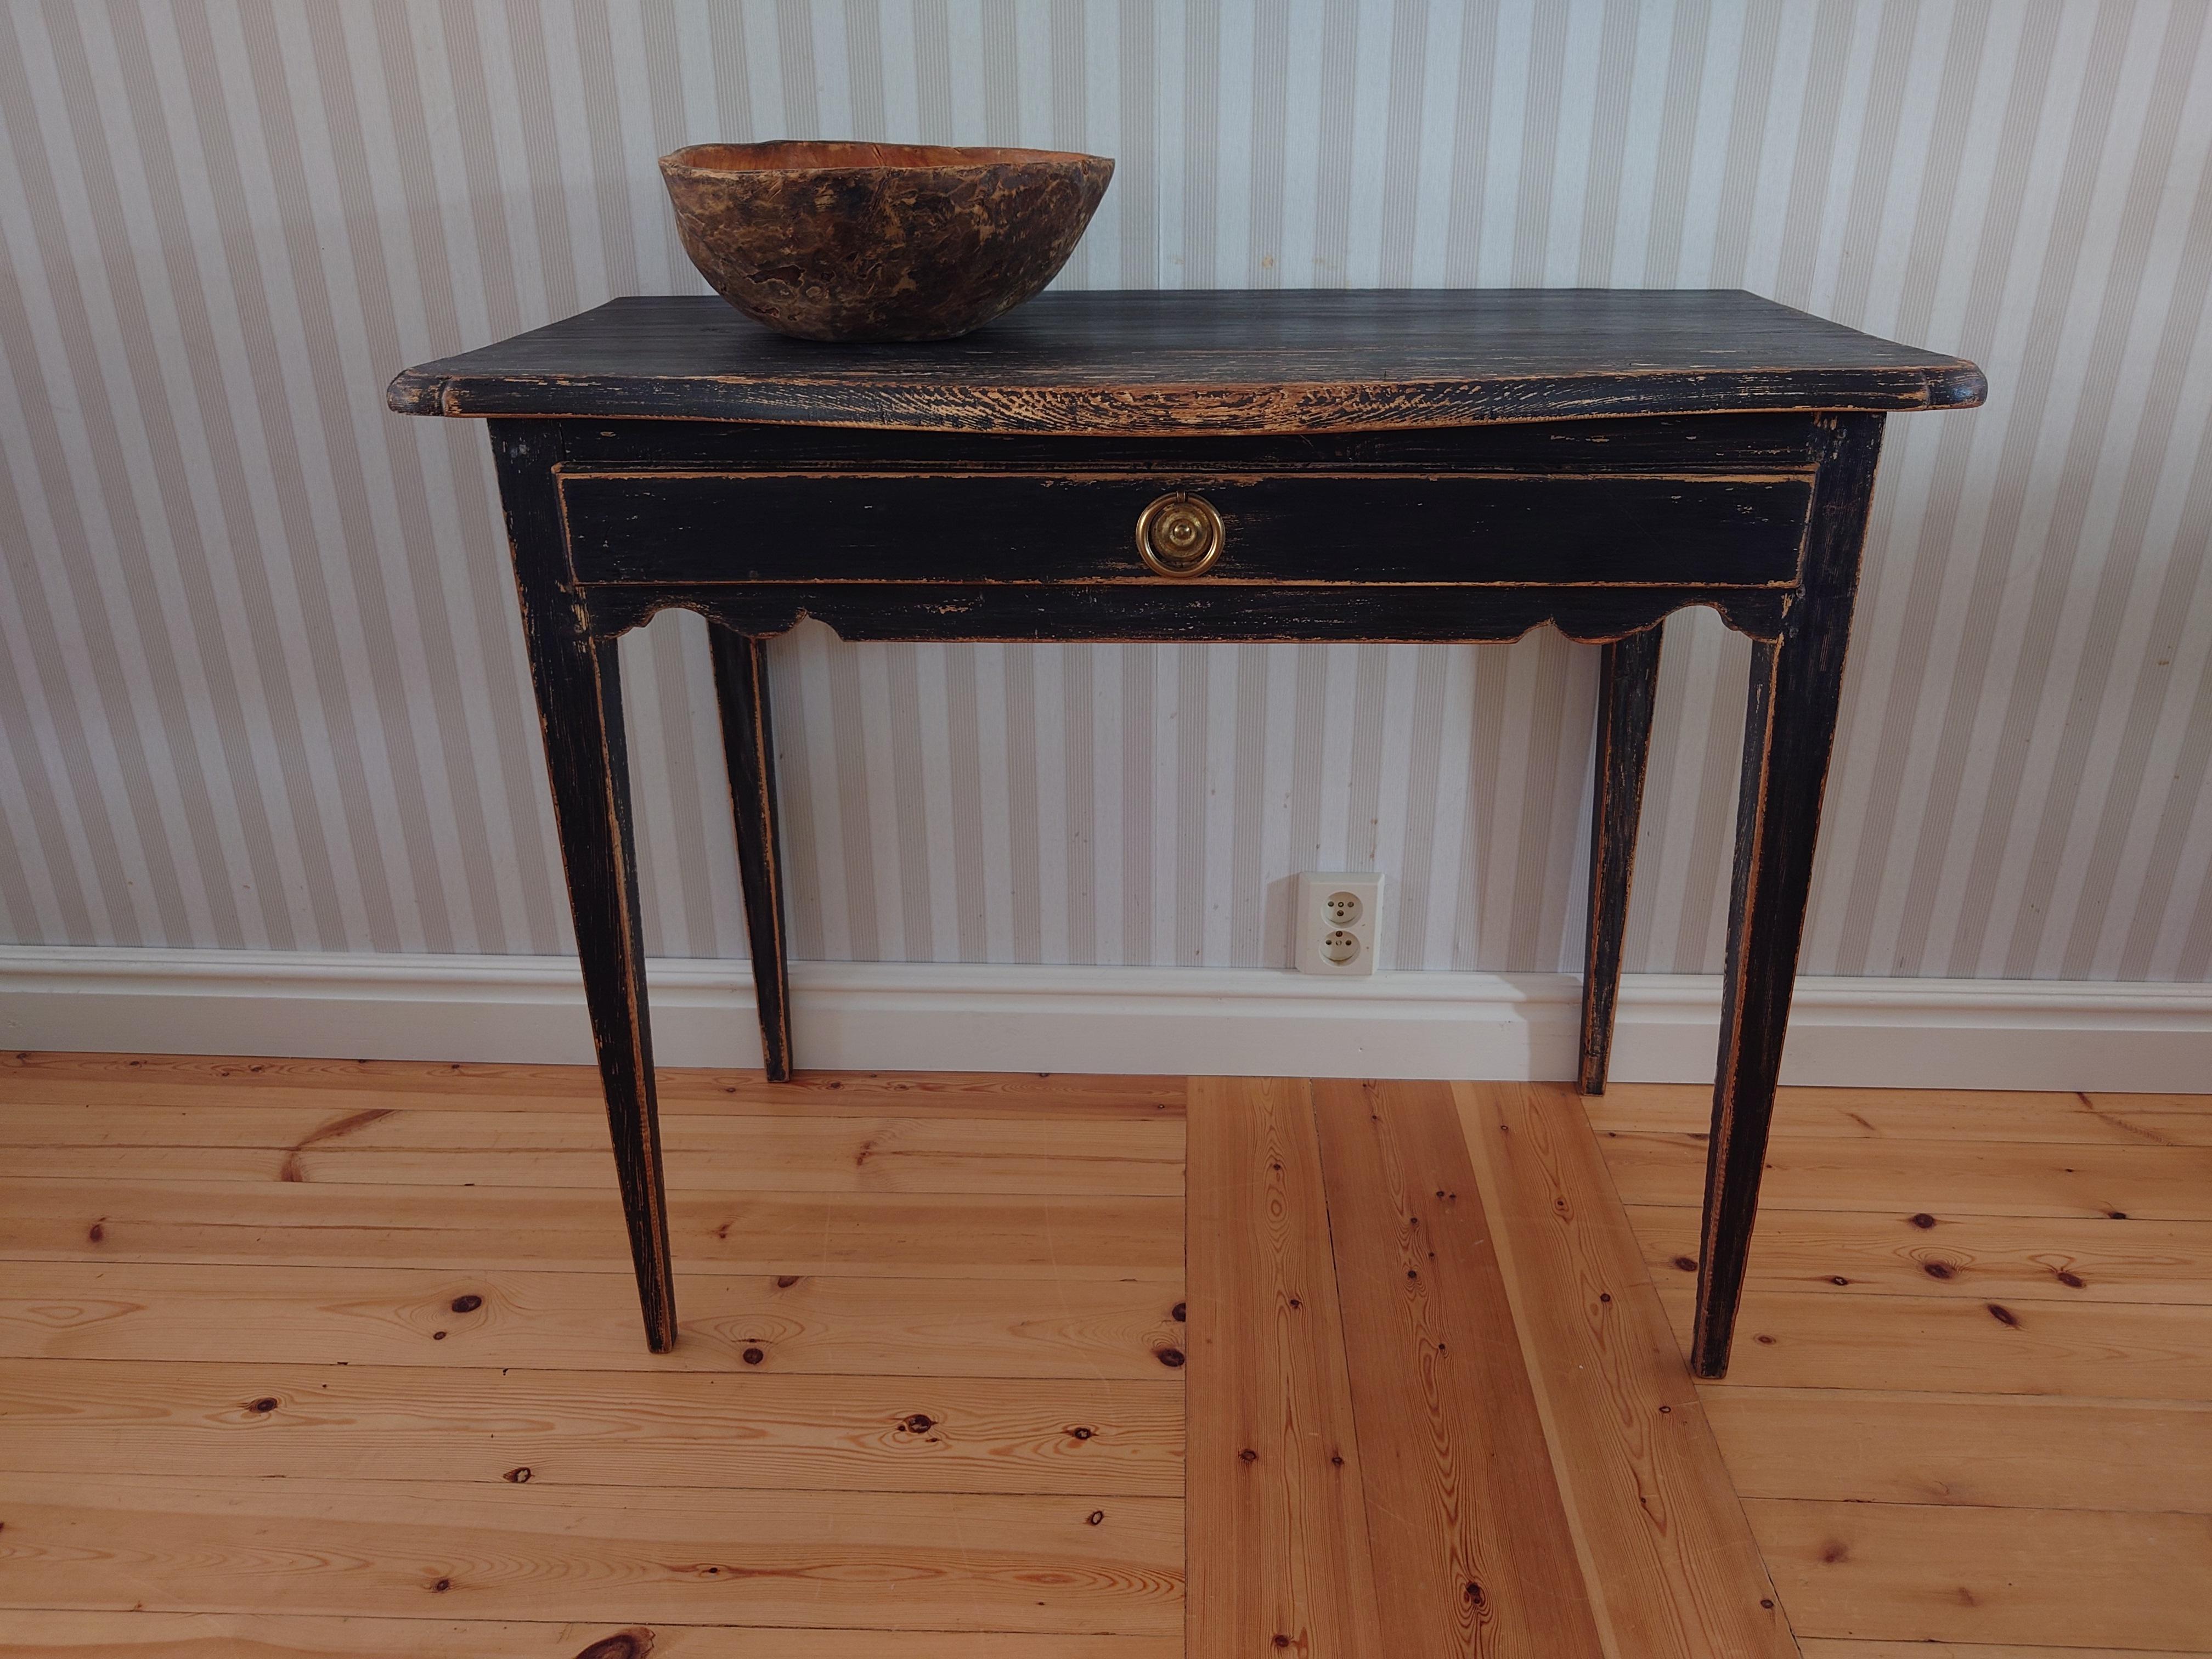 Pretty little desk with nicely curved edge. It's in transition between Rococo and Gustavian.
It is more recently painted with wear where you can see the pine shining through.
It has nice brass fitting.The fitting is period but not original to the